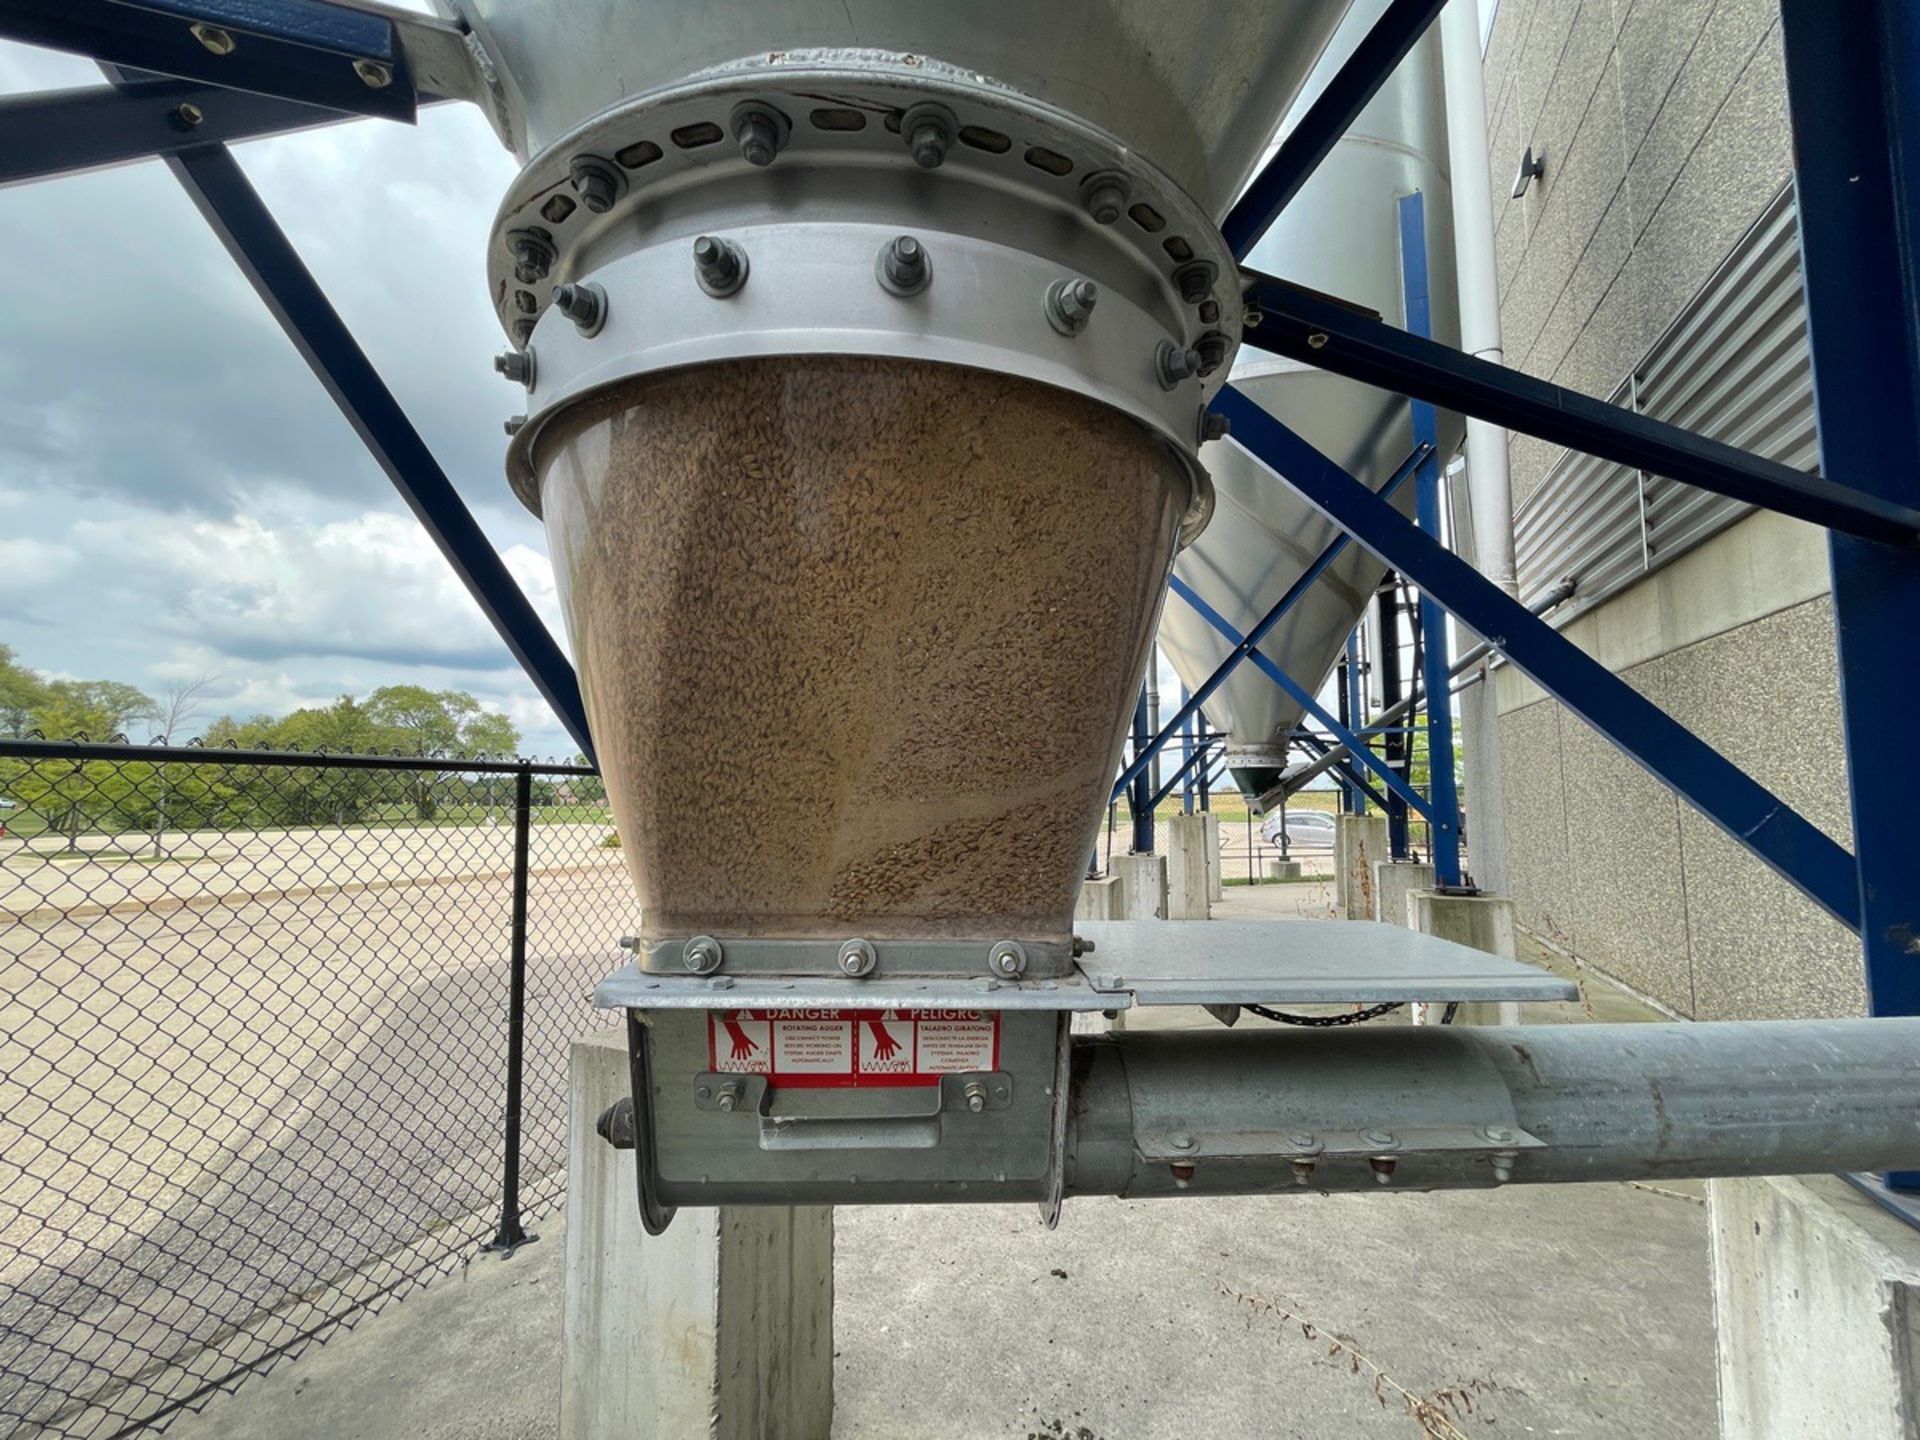 2013 Schuld/Bushnell 34.6 Ton Grain Silo, HP-60, 1730 Cubic ft, 10' x 18' Tank, S/N | Rig Fee $3500 - Image 10 of 12